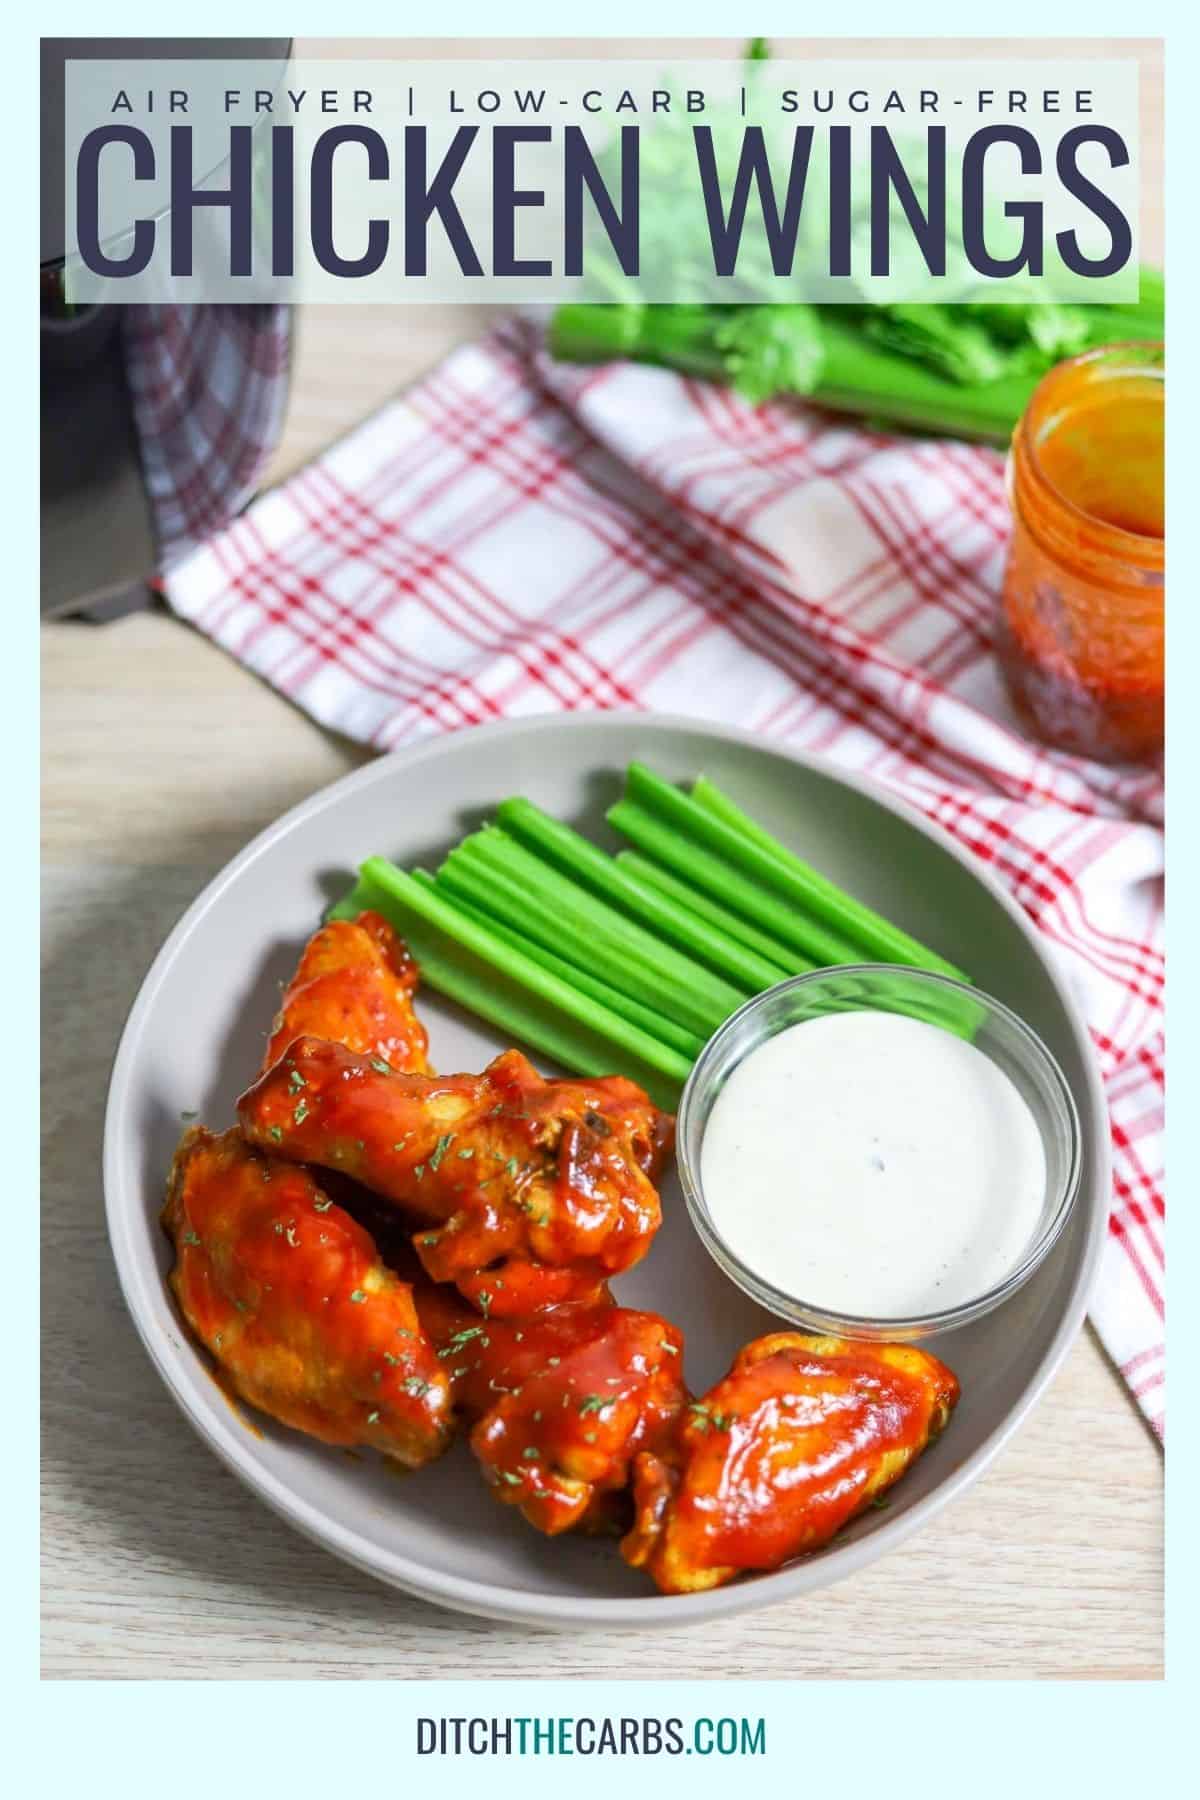 How To Cook Air Fryer Chicken Wings (Keto Chicken) – Ditch The Carbs